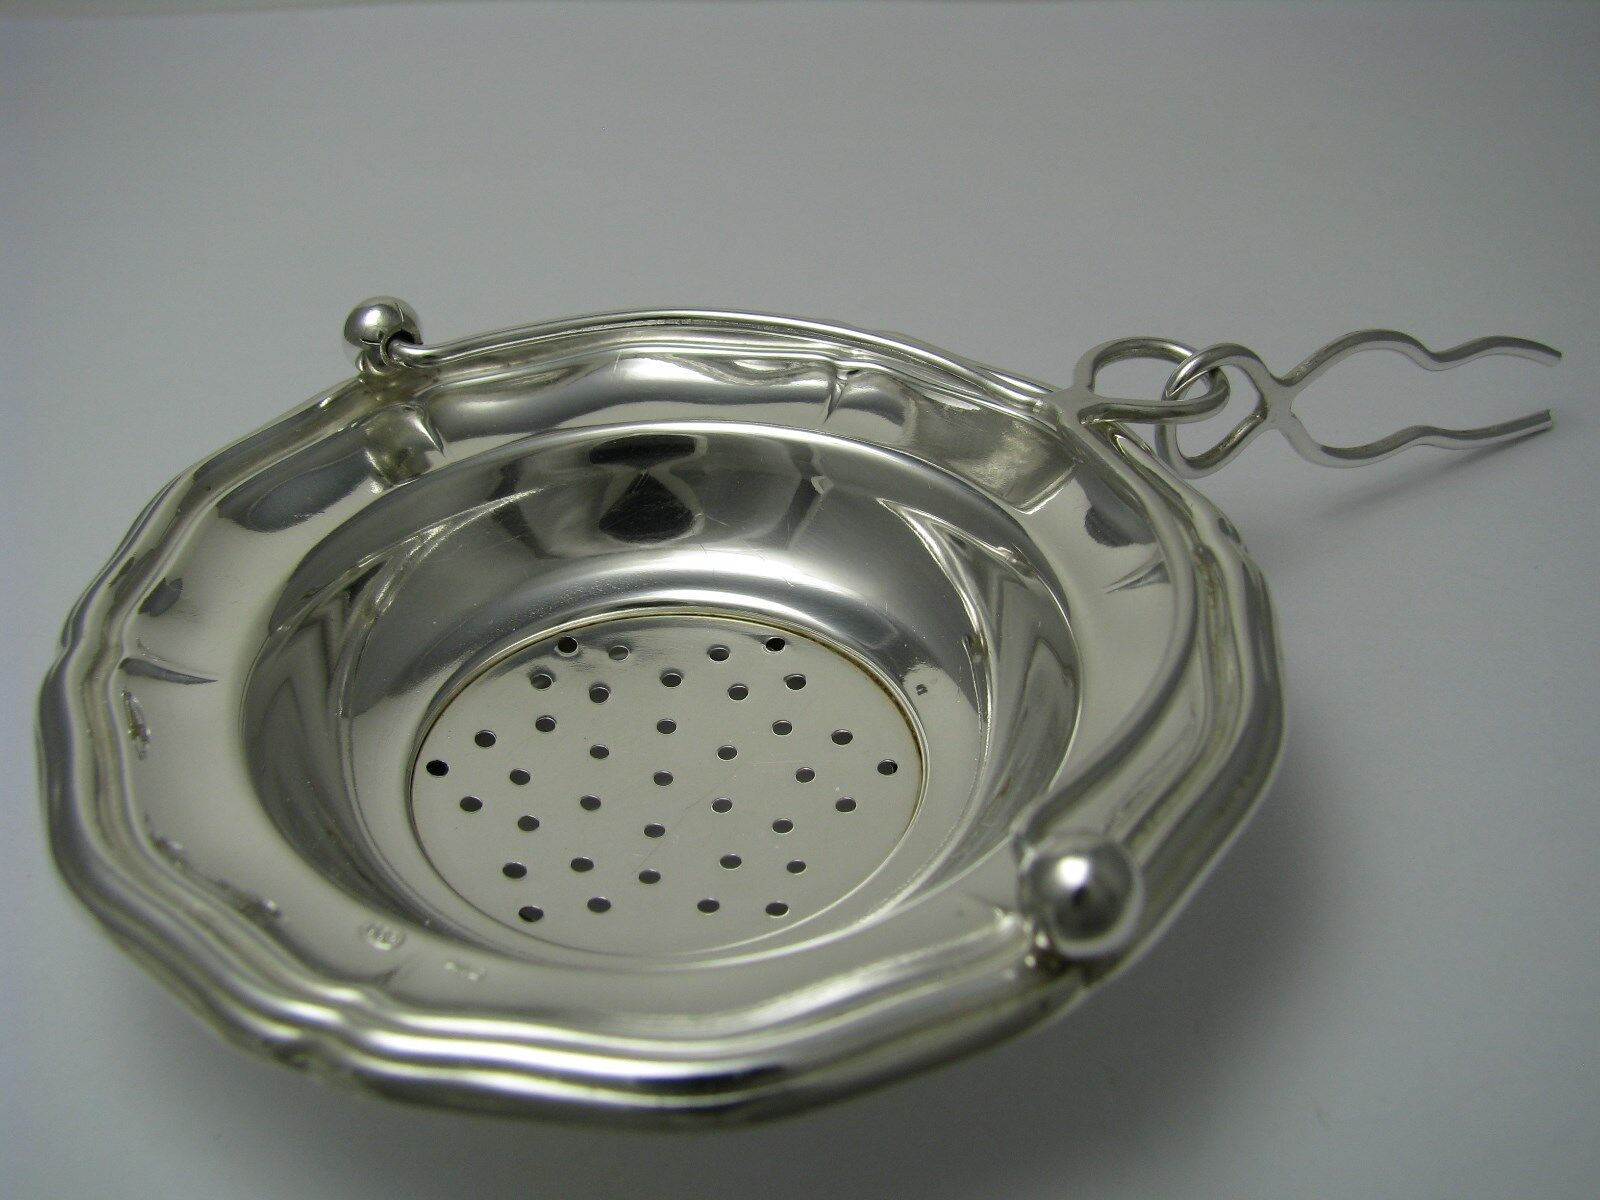 A SOLID SILVER TEA STRAINER TEAPOT SPOUT STRAINER Vercelli Italy ca1960s